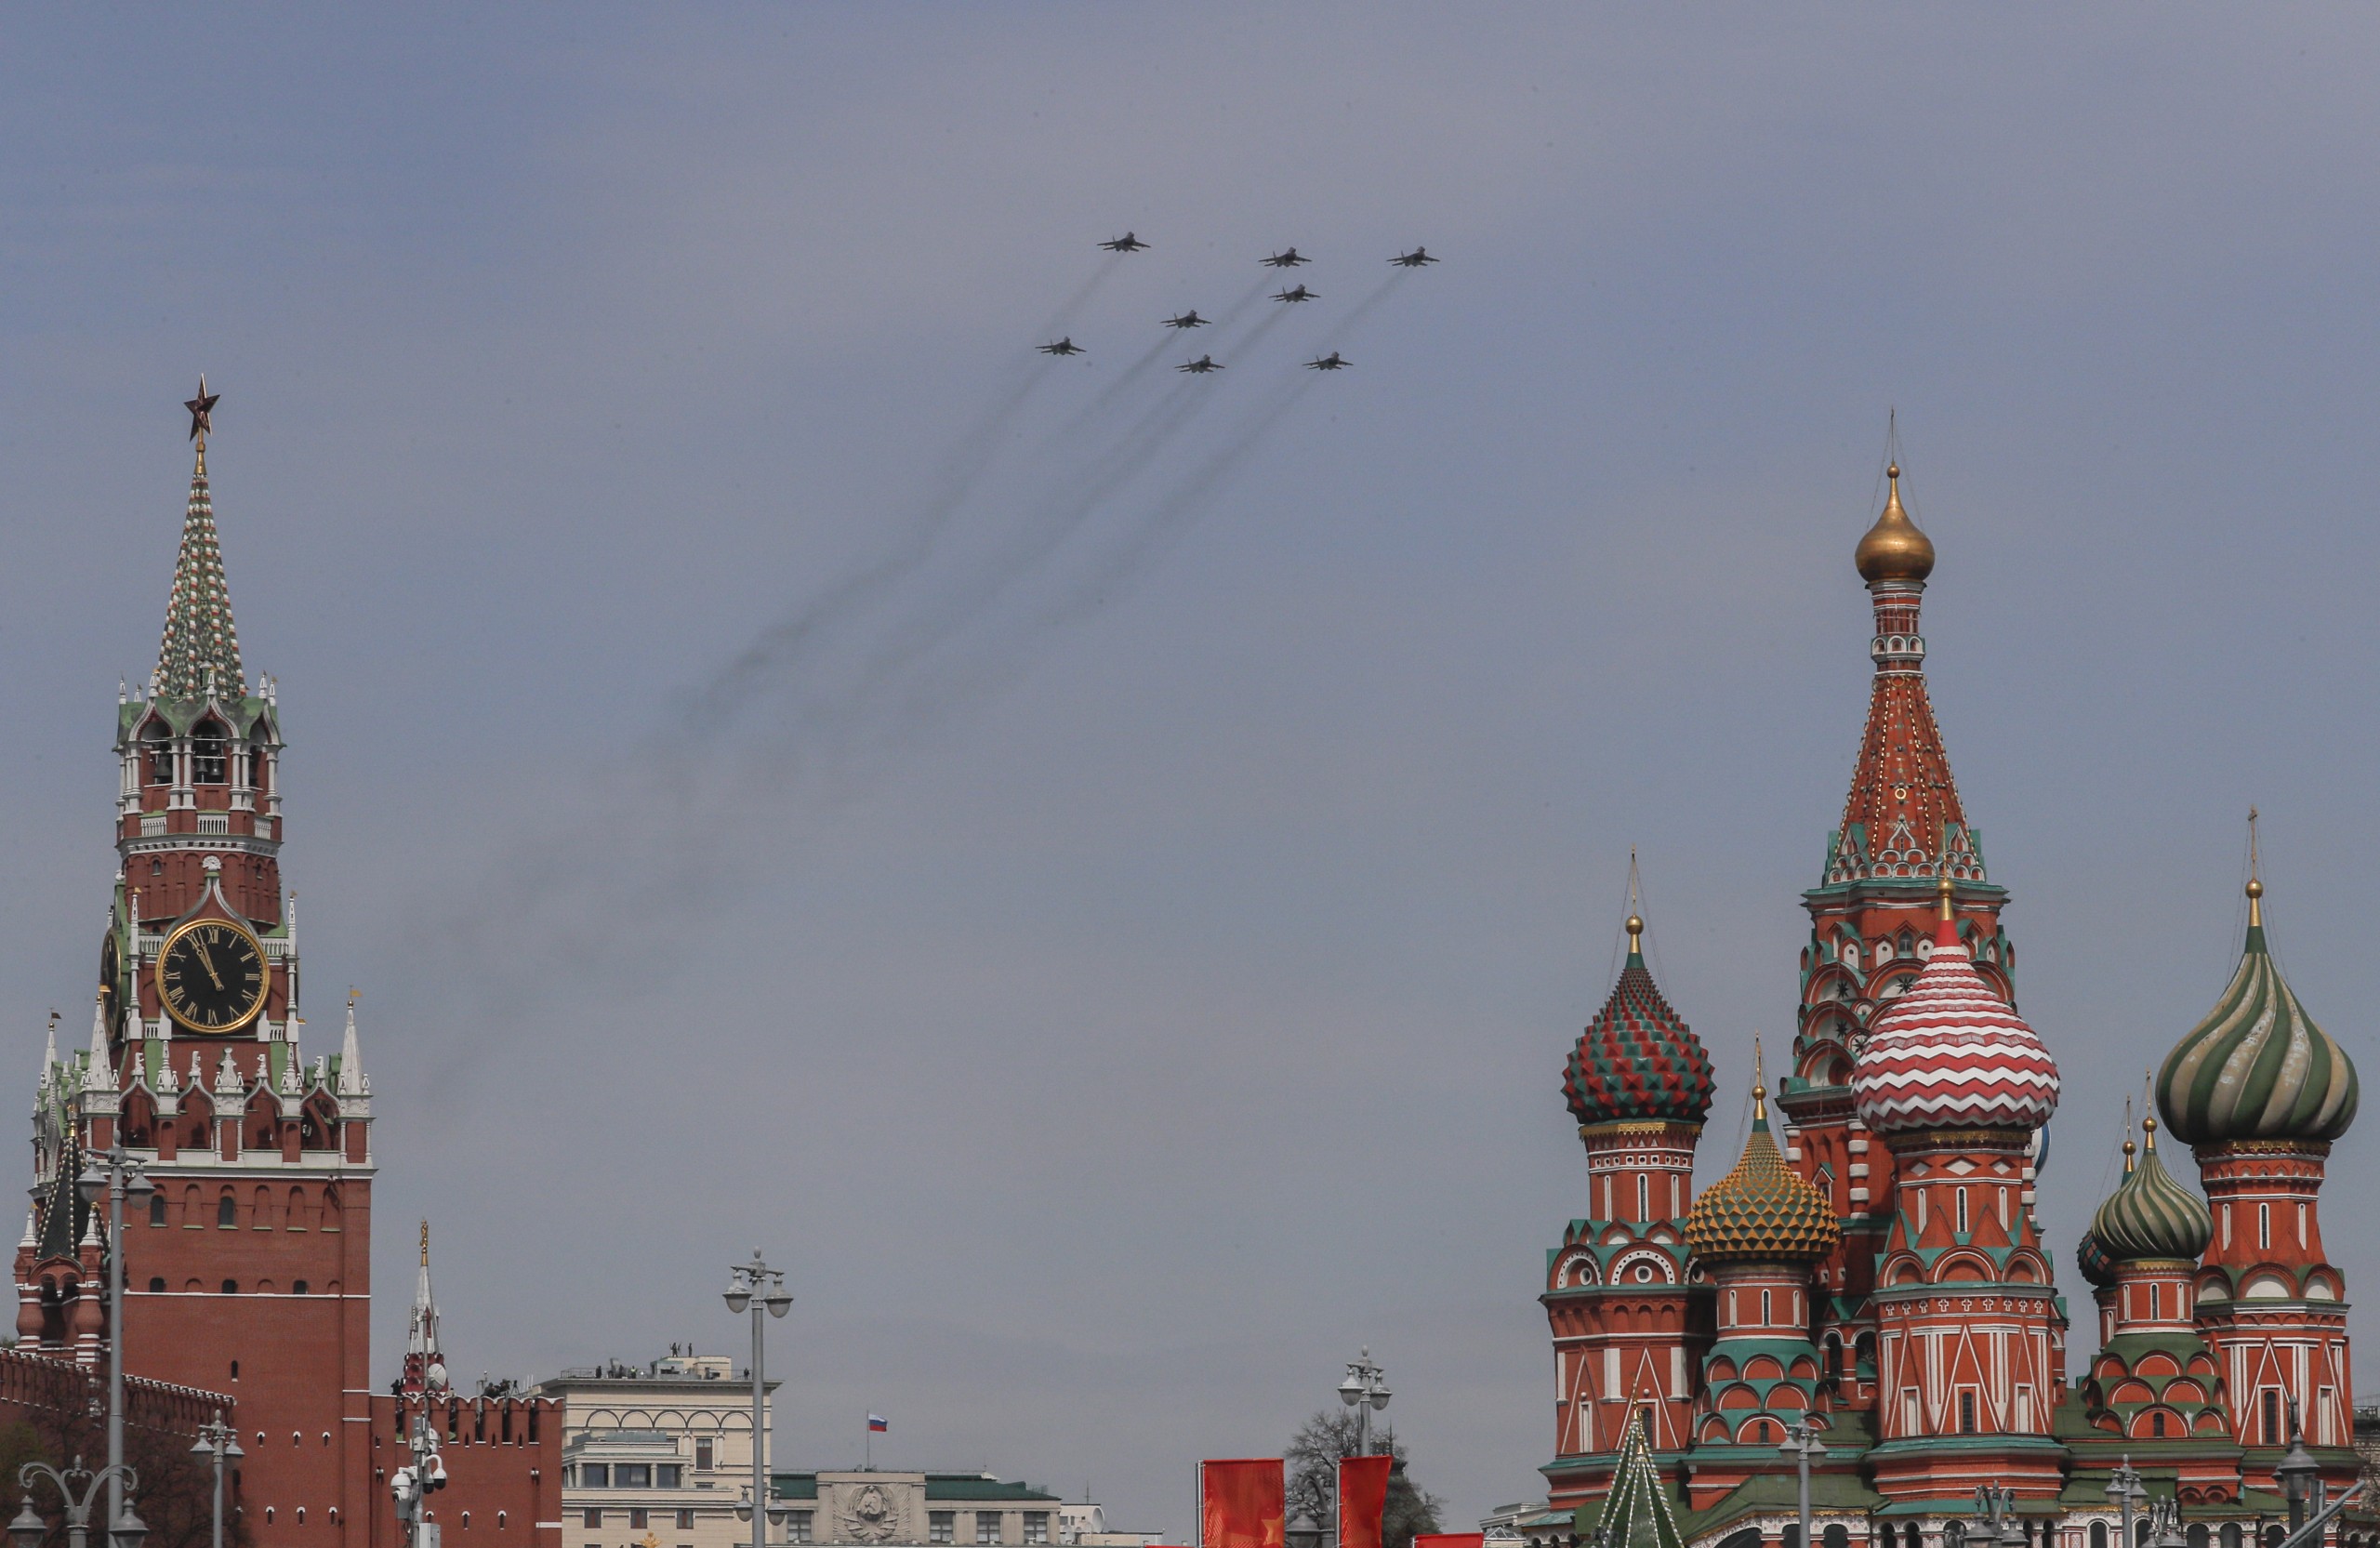 epa09931137 Russian MiG-29SMT fighters in flight order 'Z' perform a flyover during the Victory Day military parade general rehearsal in the Red Square in Moscow, Russia, 07 May 2022. The Victory Day military parade will take place 09 May 2022 in the Red Square to mark the victory of the Soviet Union over Nazi Germany in World War II.  EPA/SERGEI ILNITSKY